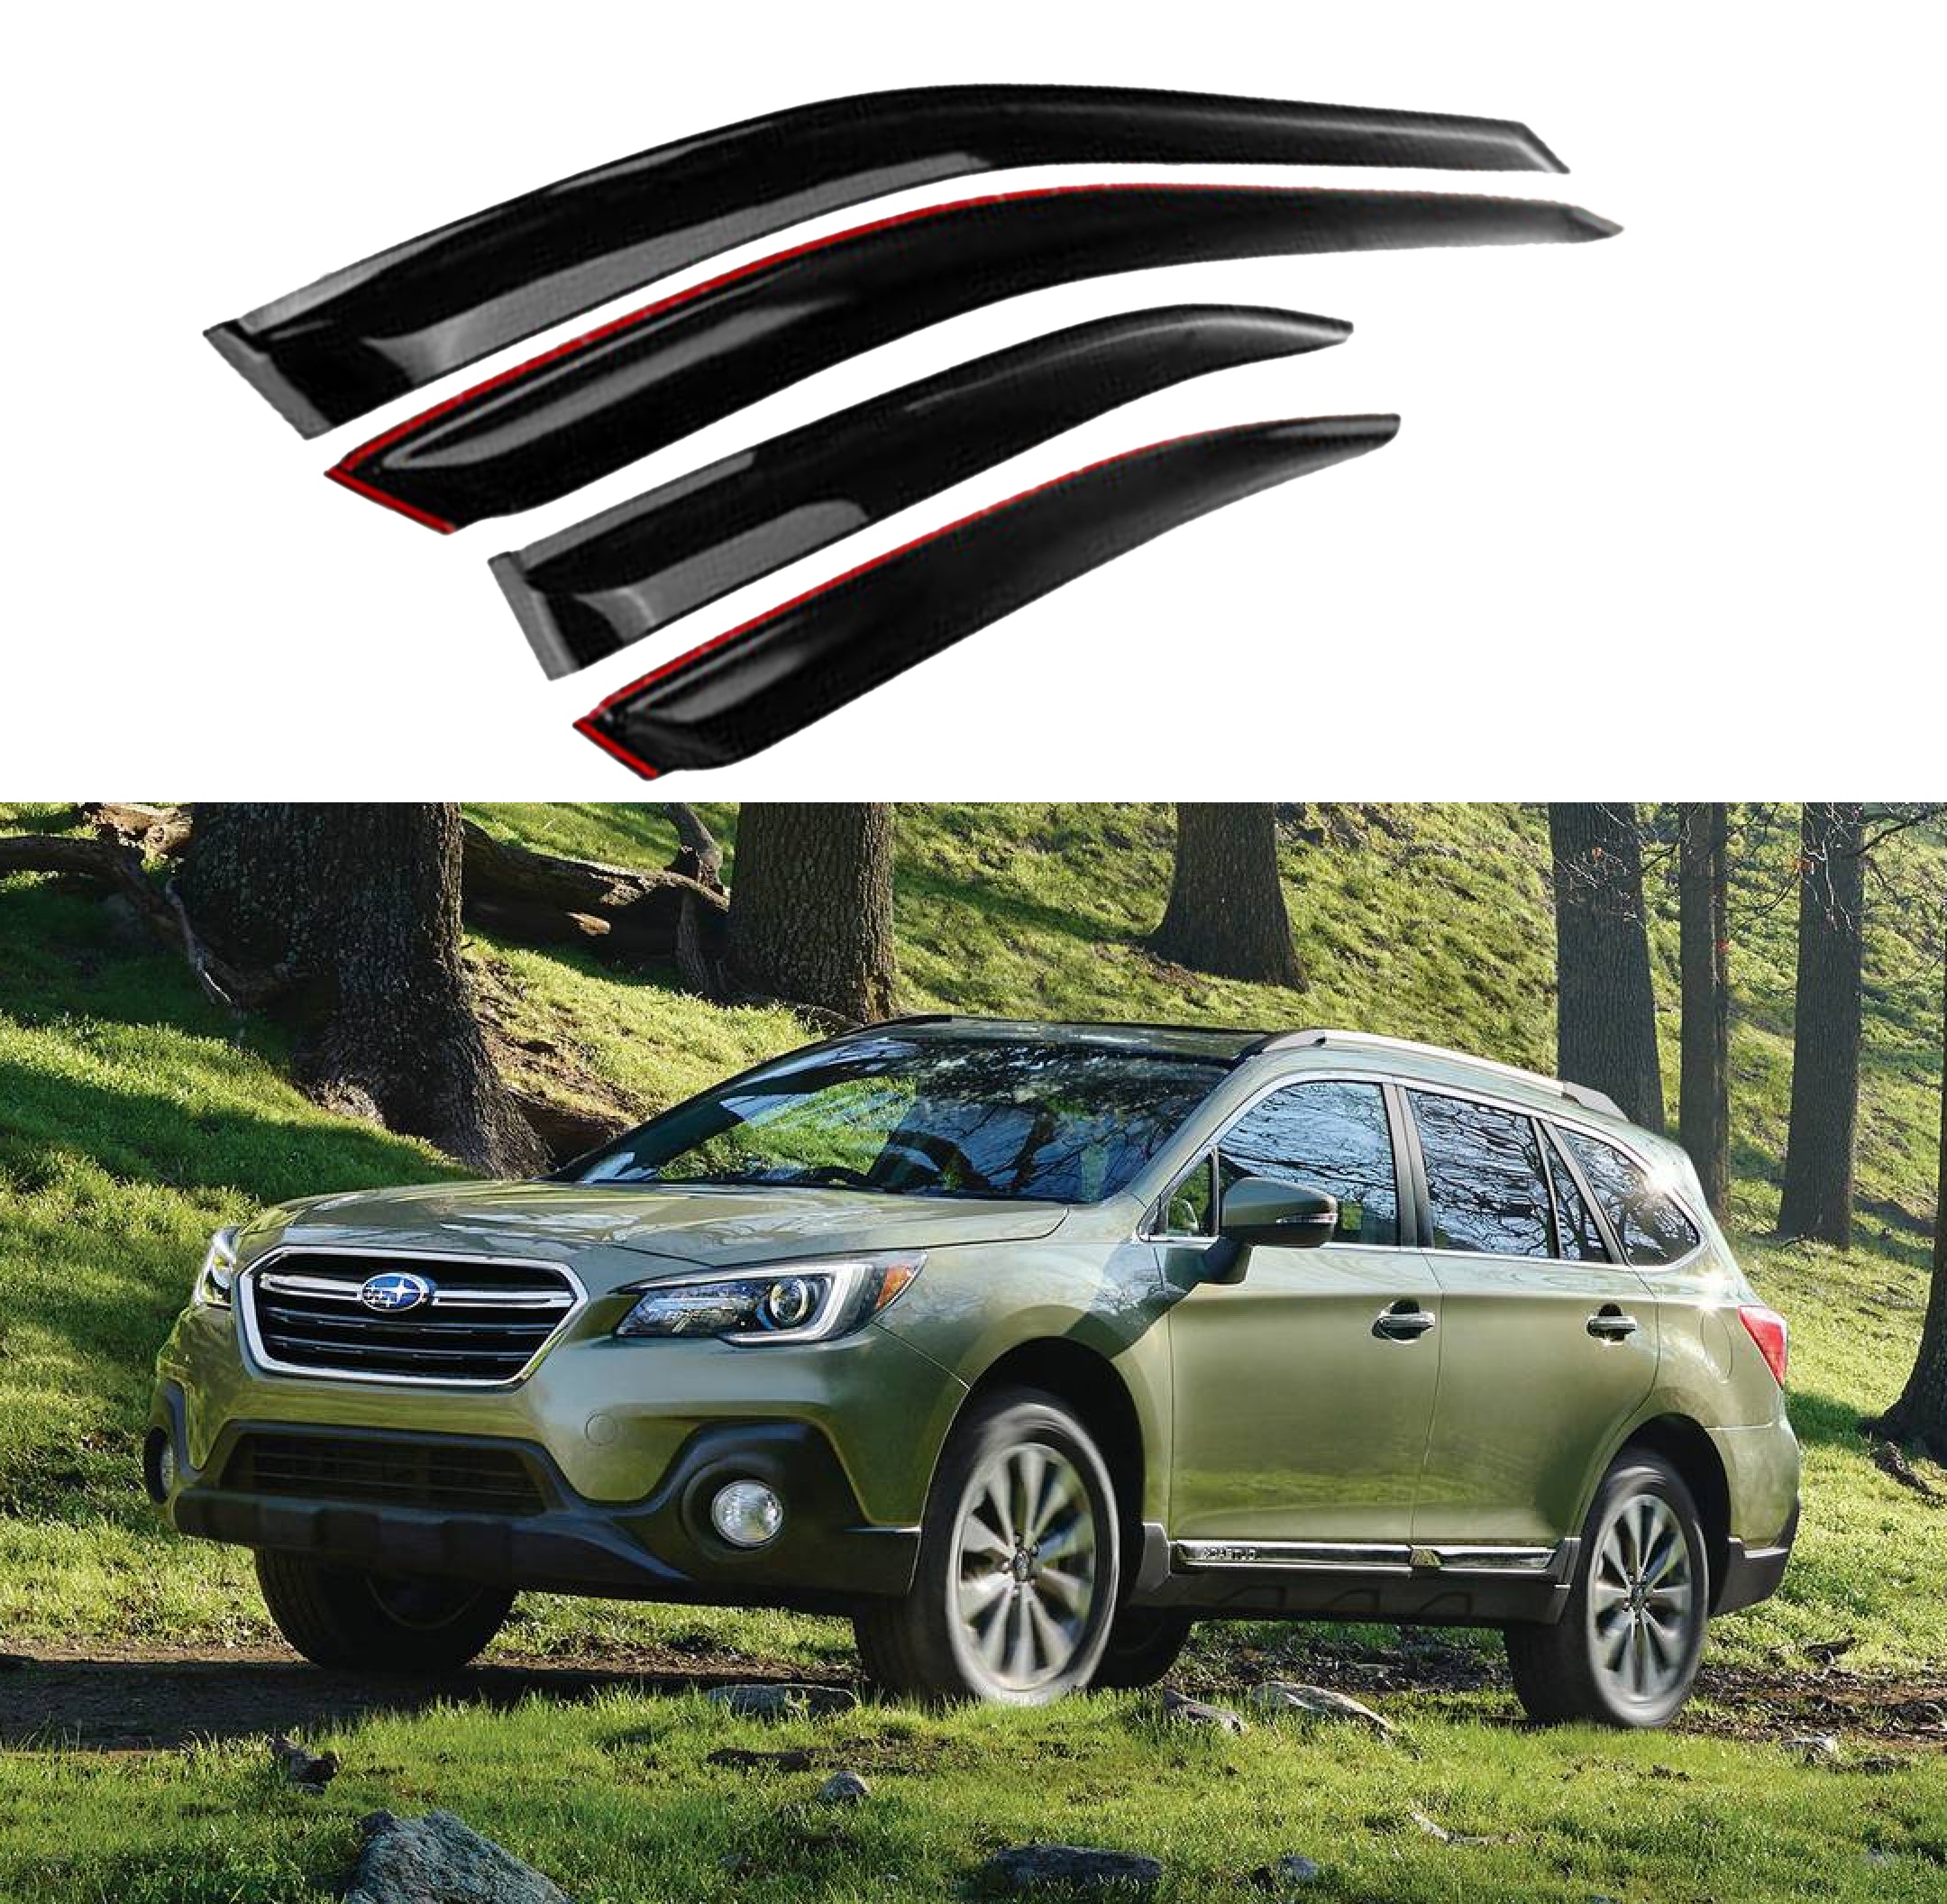 Fit 2015-2019 Subaru Outback Out-Channel Vent Window Visors Rain Sun Wind Guards Shade Deflectors